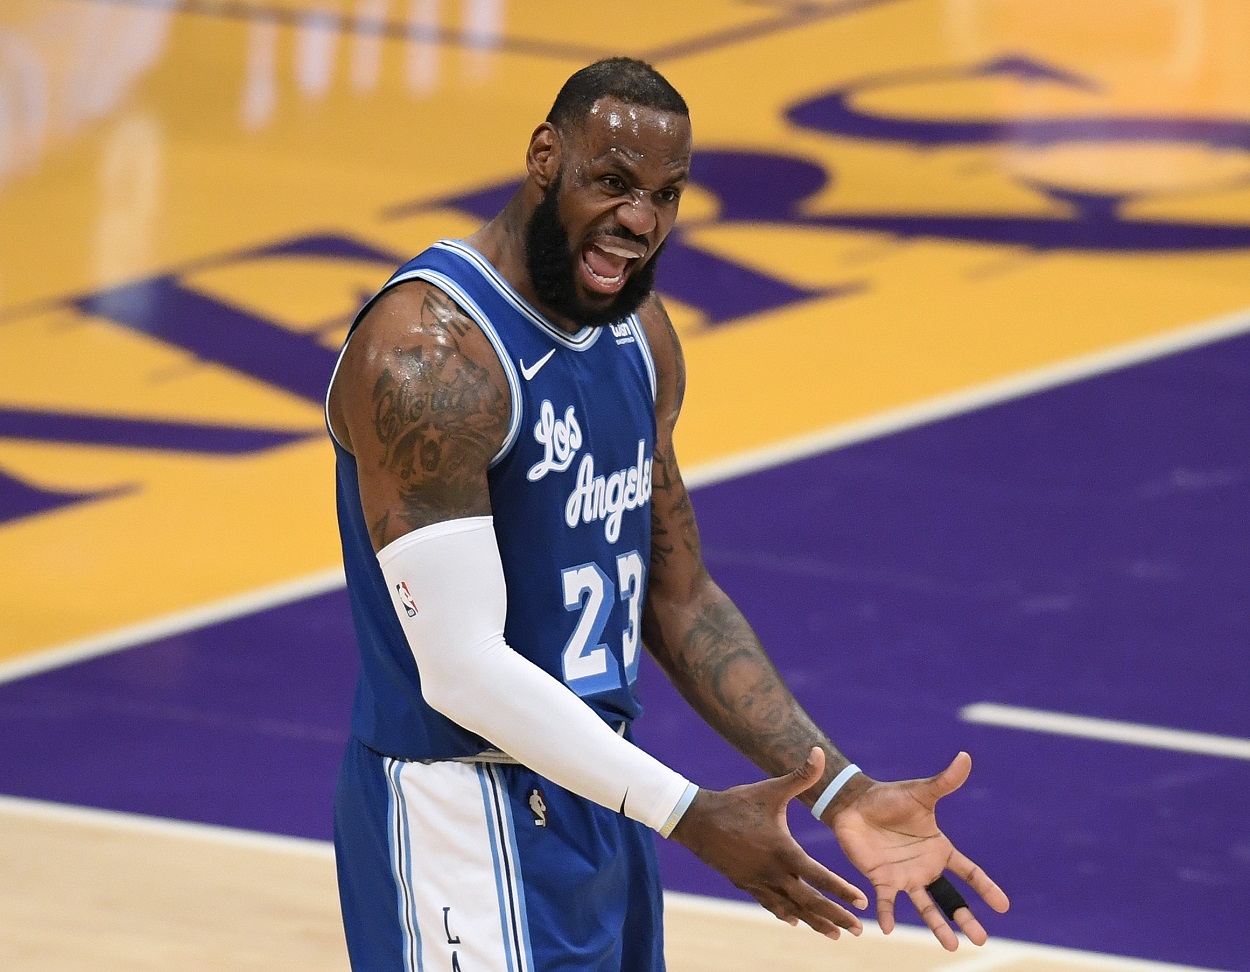 LeBron James argues a foul call during a Lakers-Timberwolves matchup in March 2021